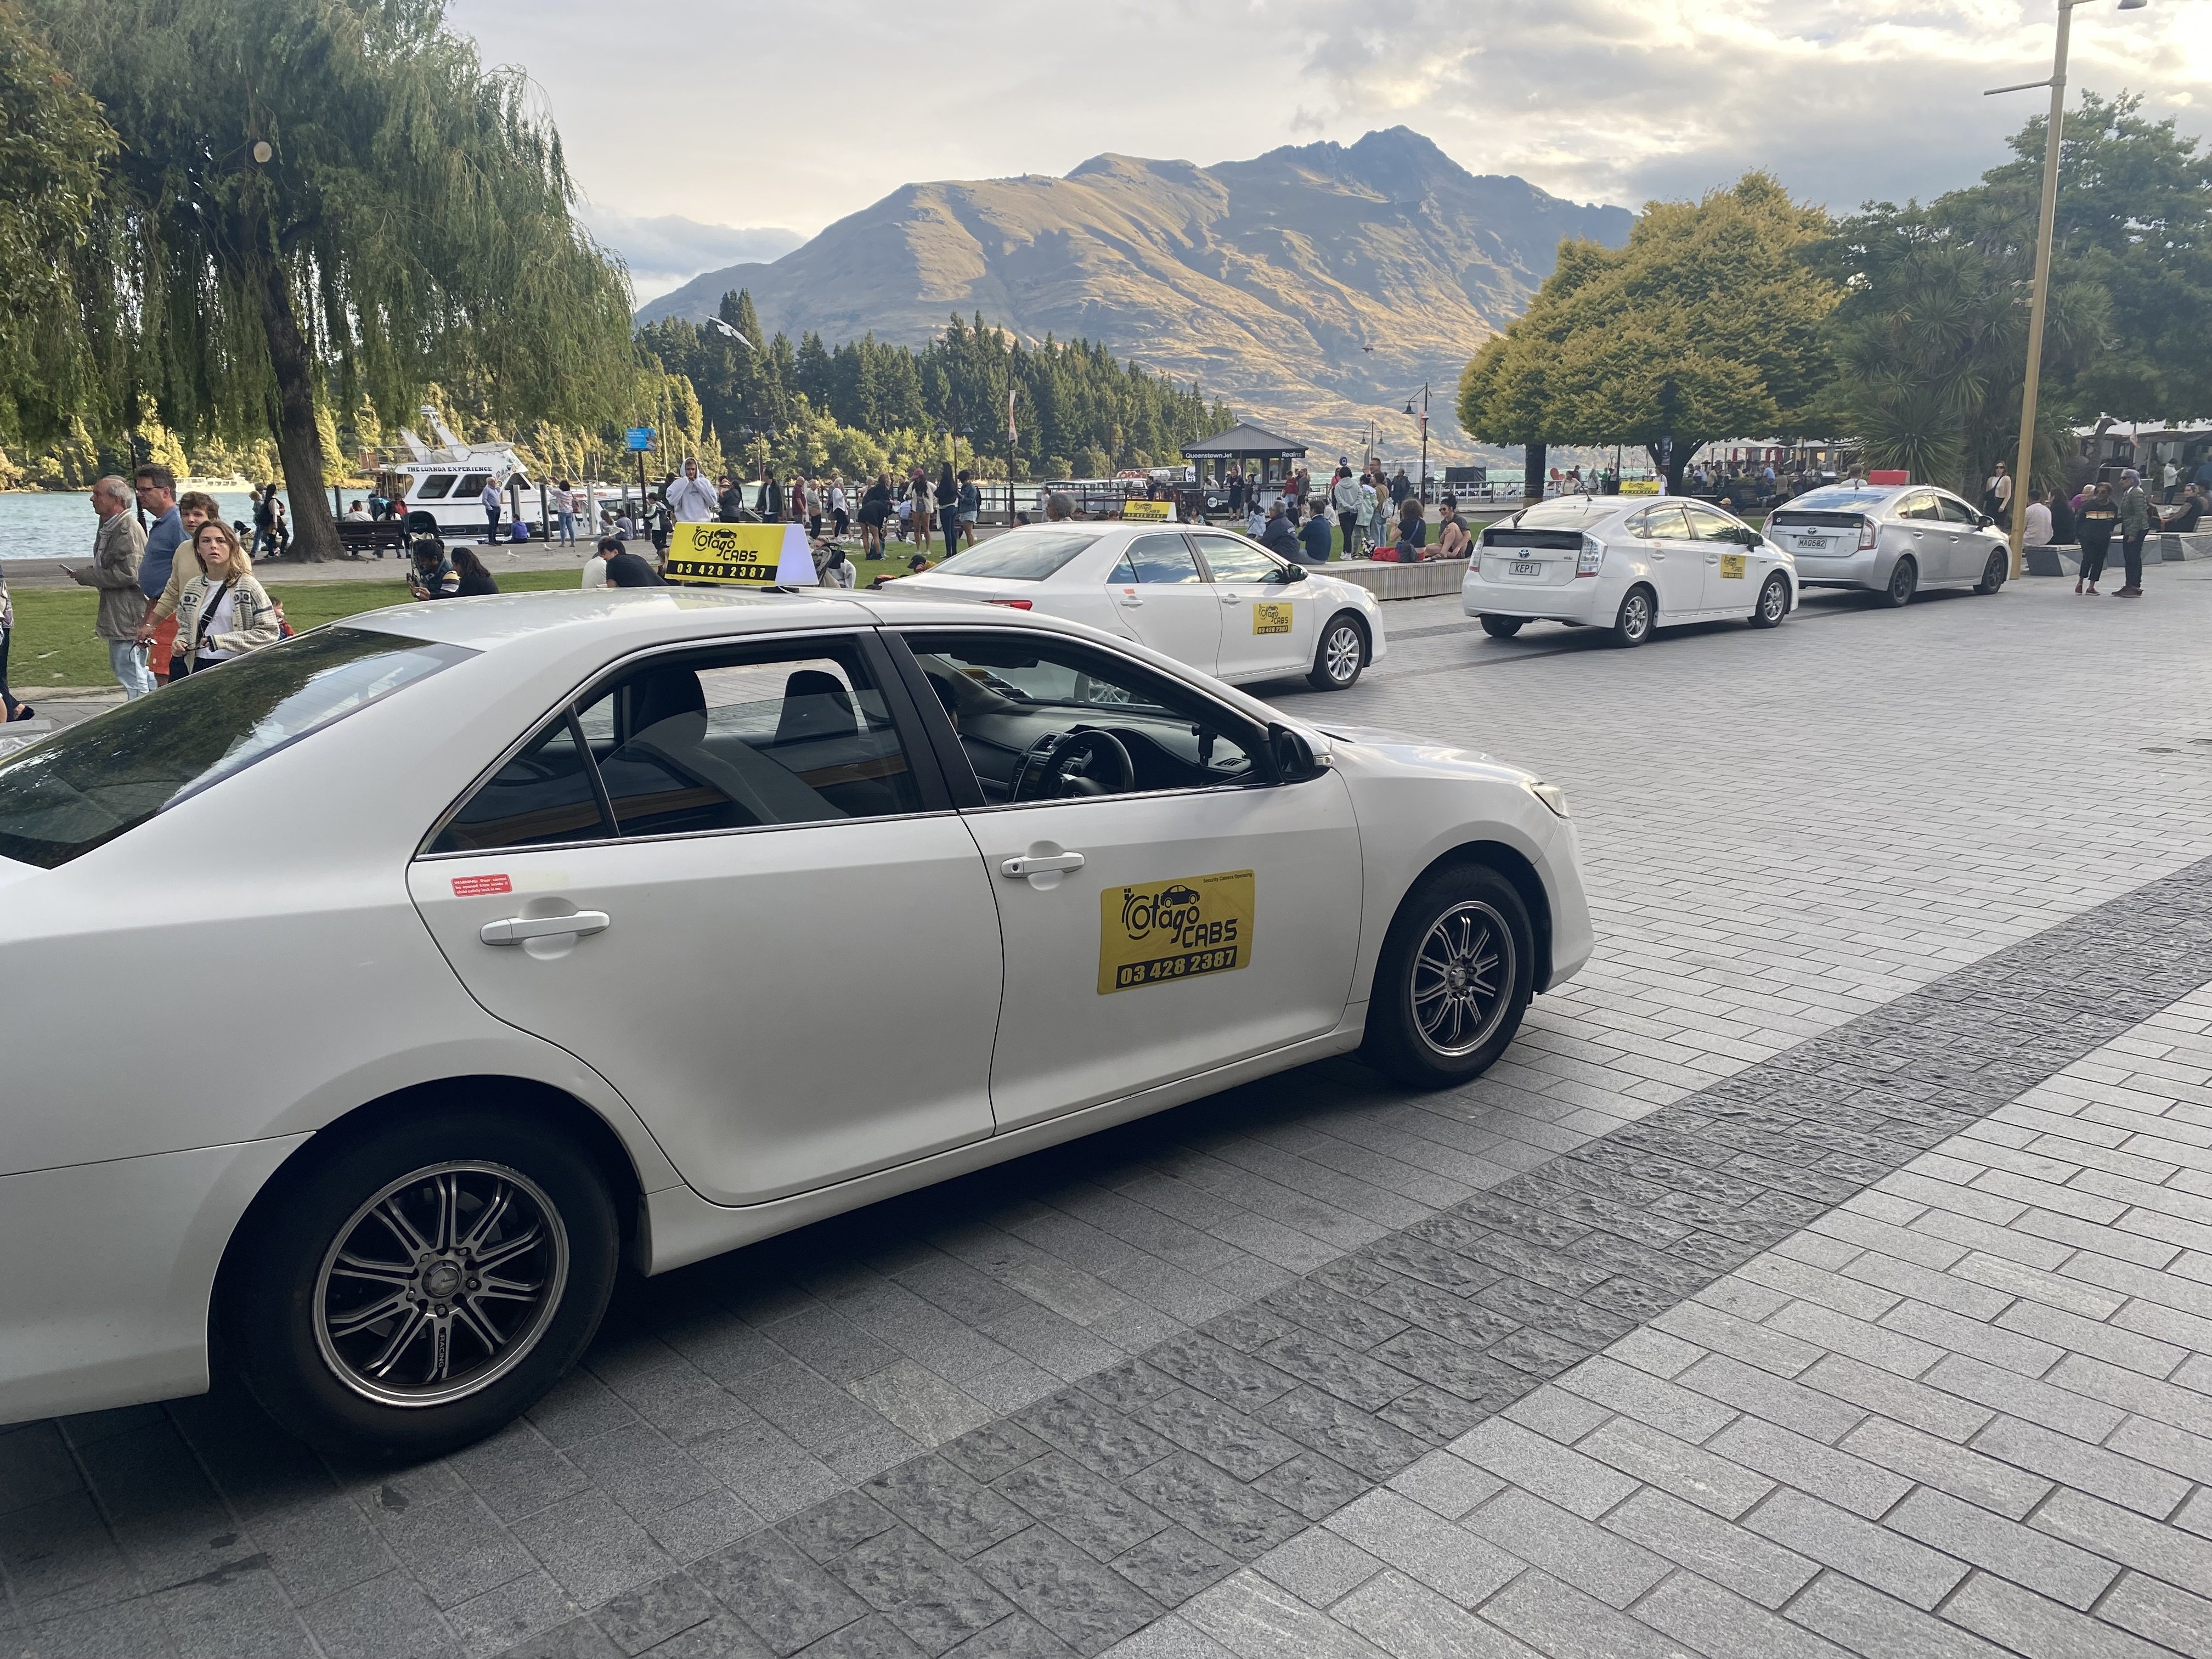 ‘Scab cabs’ have taken over shared space in Queenstown’s upgraded CBD, using it as a pseudo taxi...